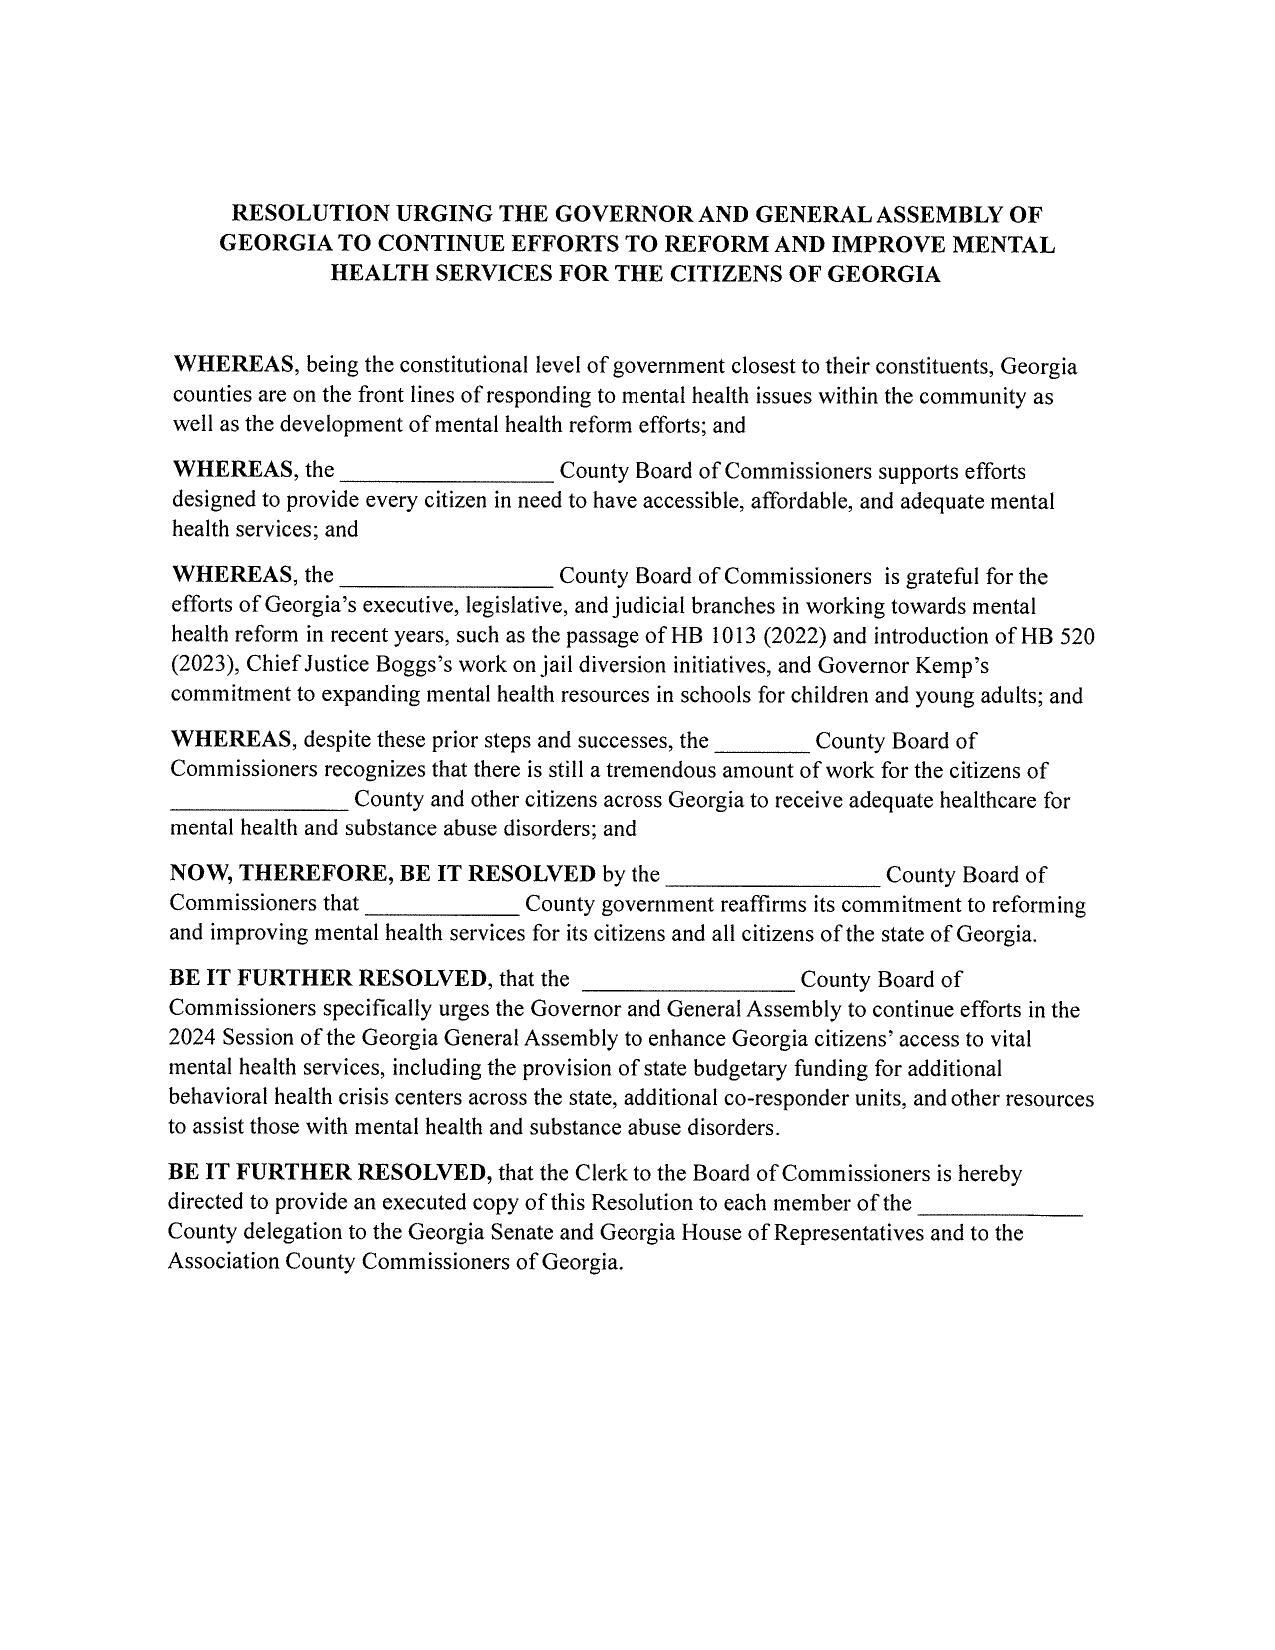 RESOLUTION URGING THE GOVERNOR AND GENERAL ASSEMBLY OF